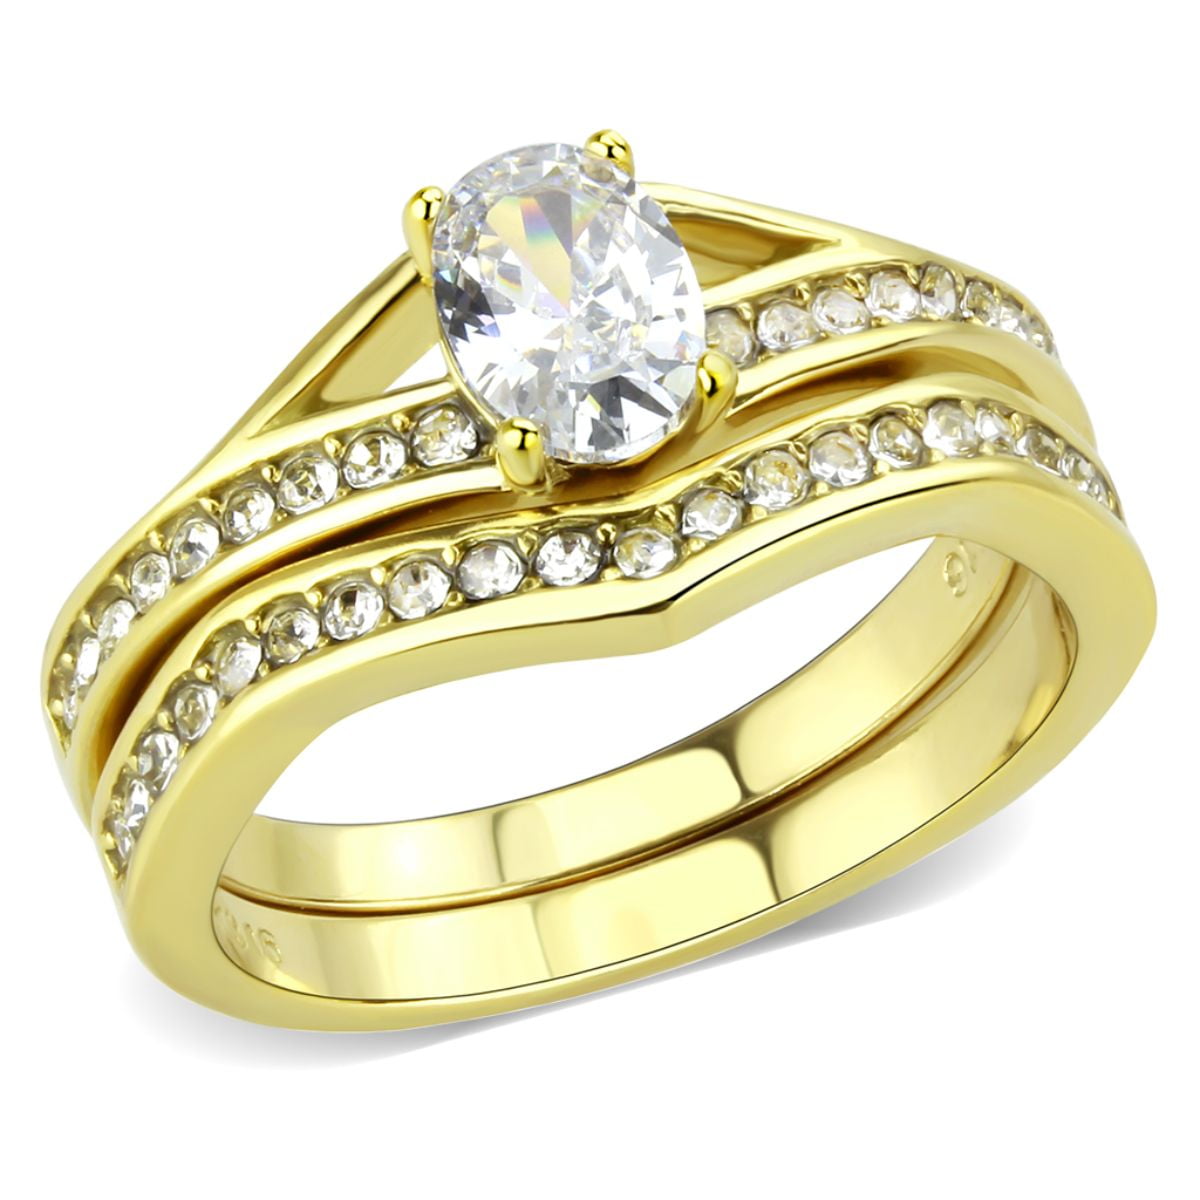 2 Piece Cz Wedding Engagement Ring Set Yellow Gold Plated Stainless Steel 